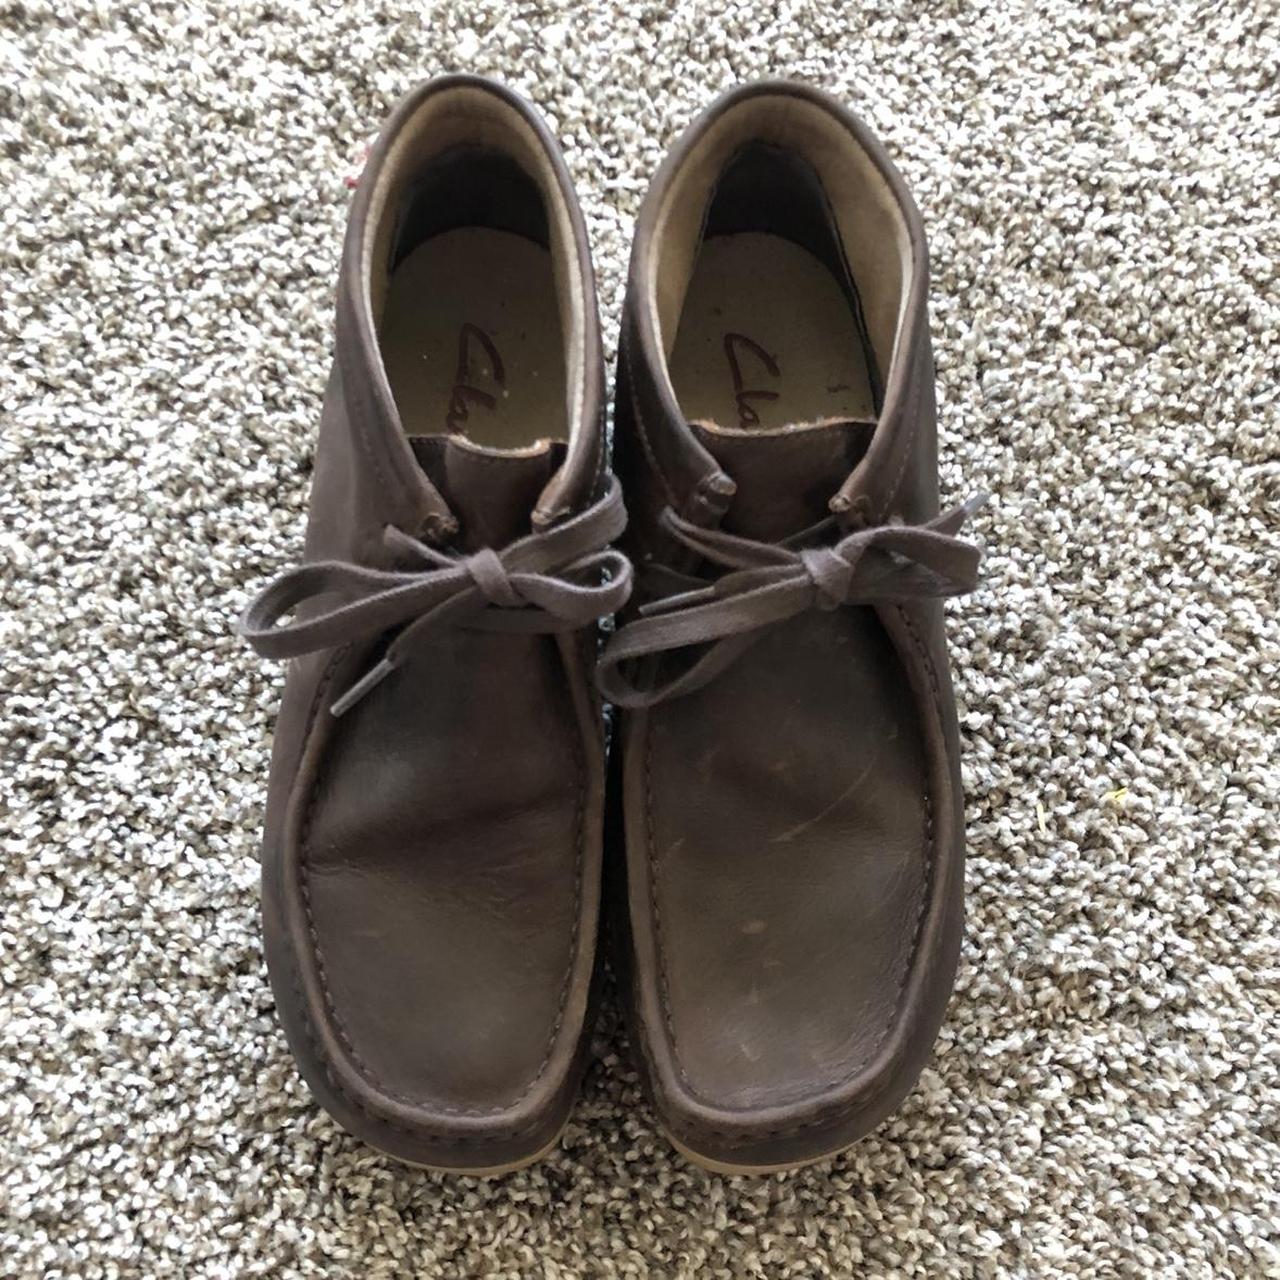 Product Image 2 - Clarks wallabees size 9.5